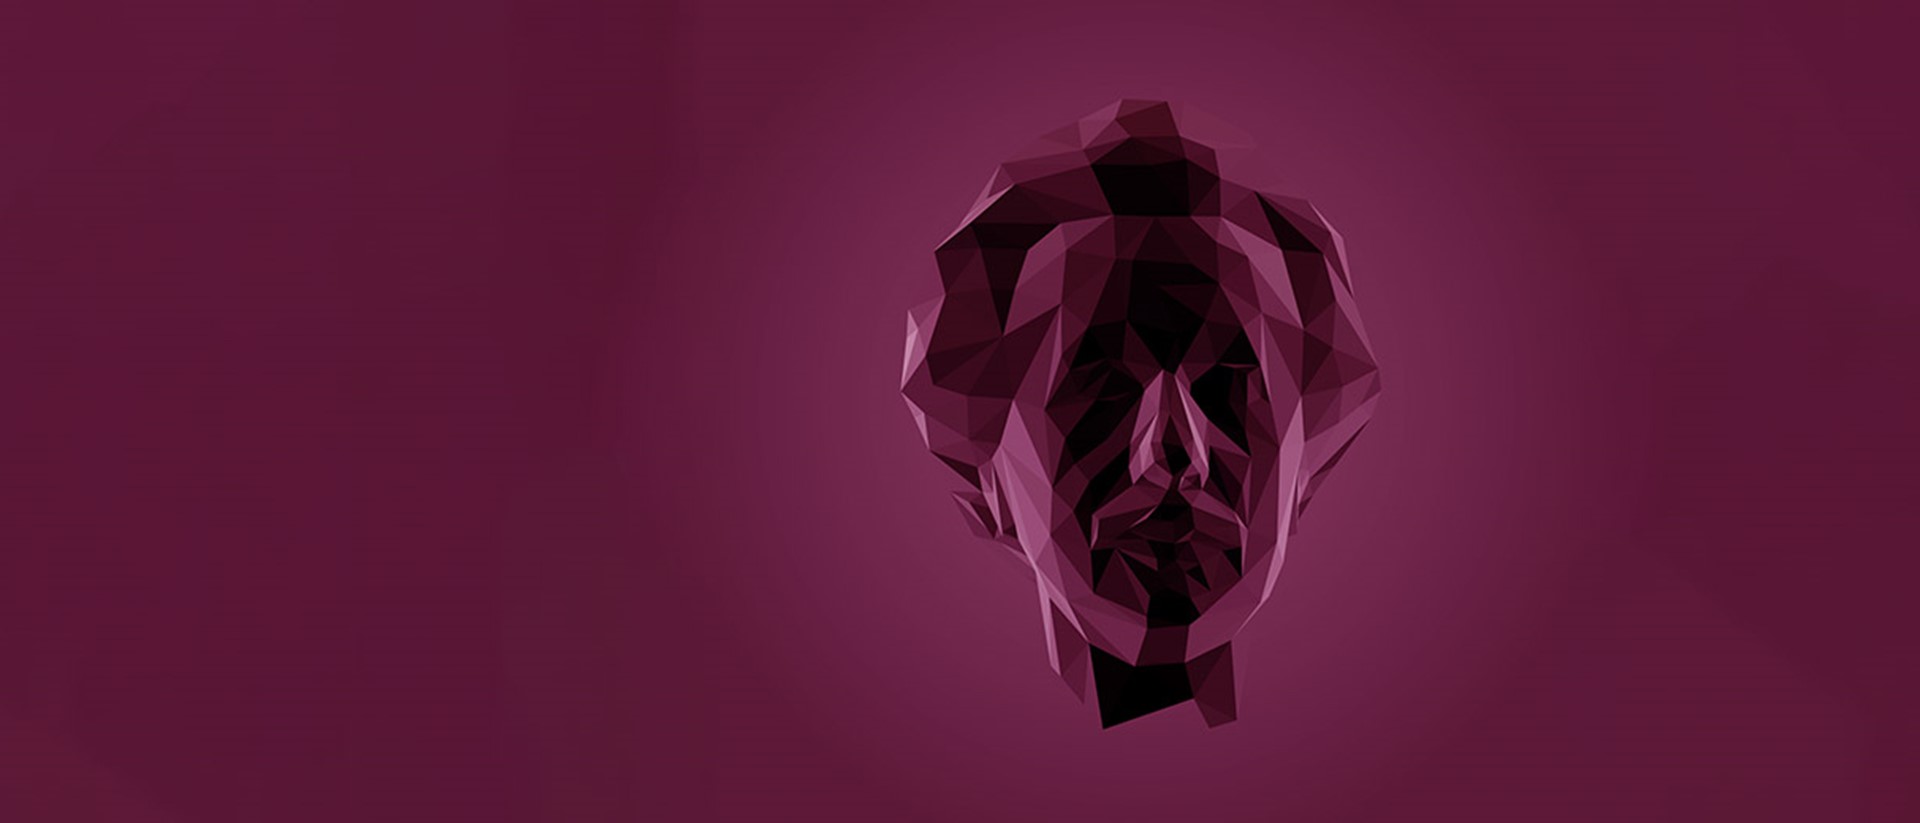 Image of a 3D model based on Alfred Einstein on a purple background